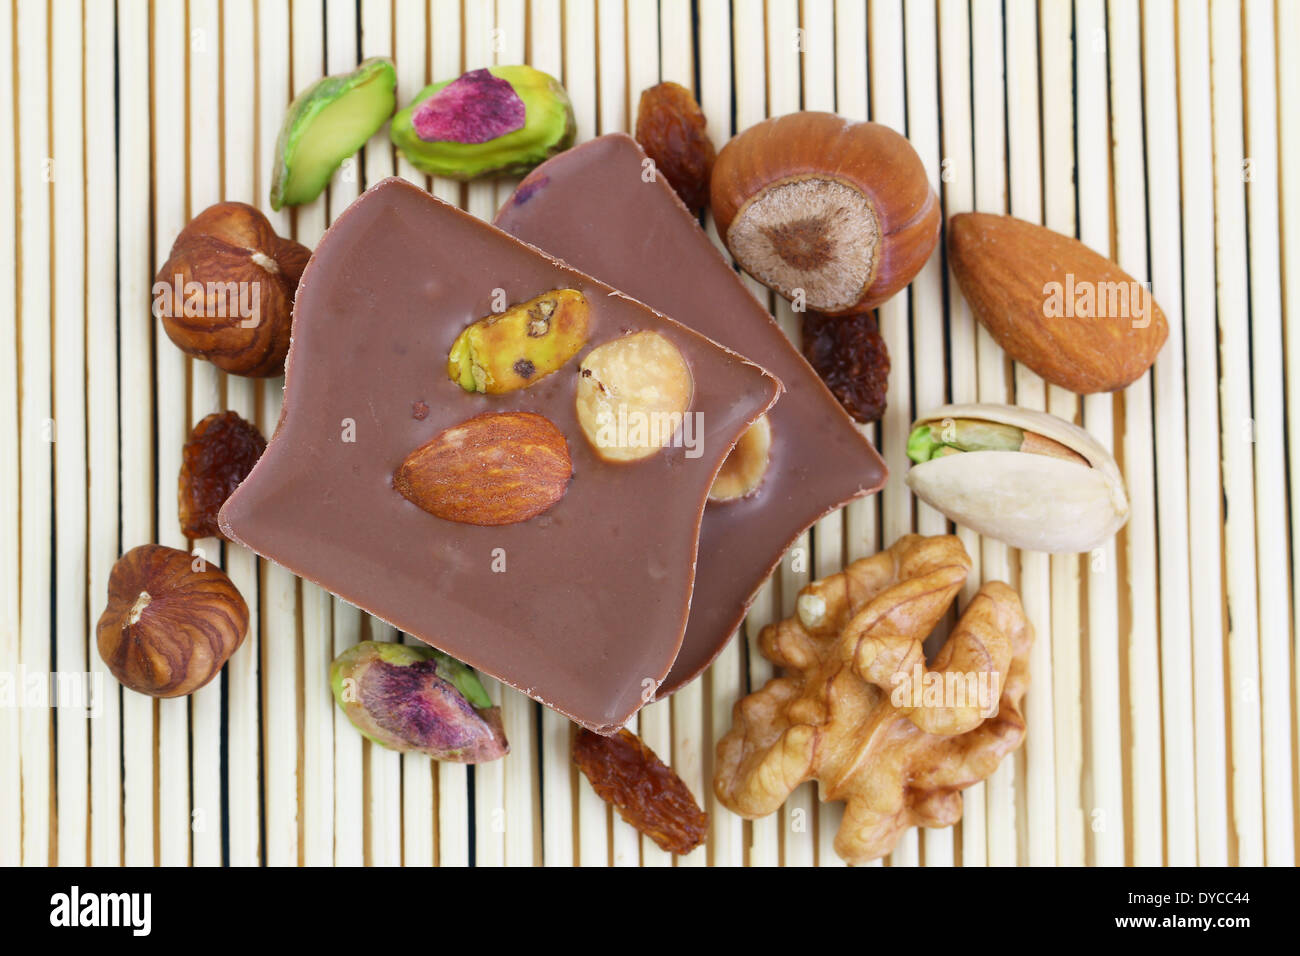 Milk chocolate with nuts, almonds and raisins Stock Photo